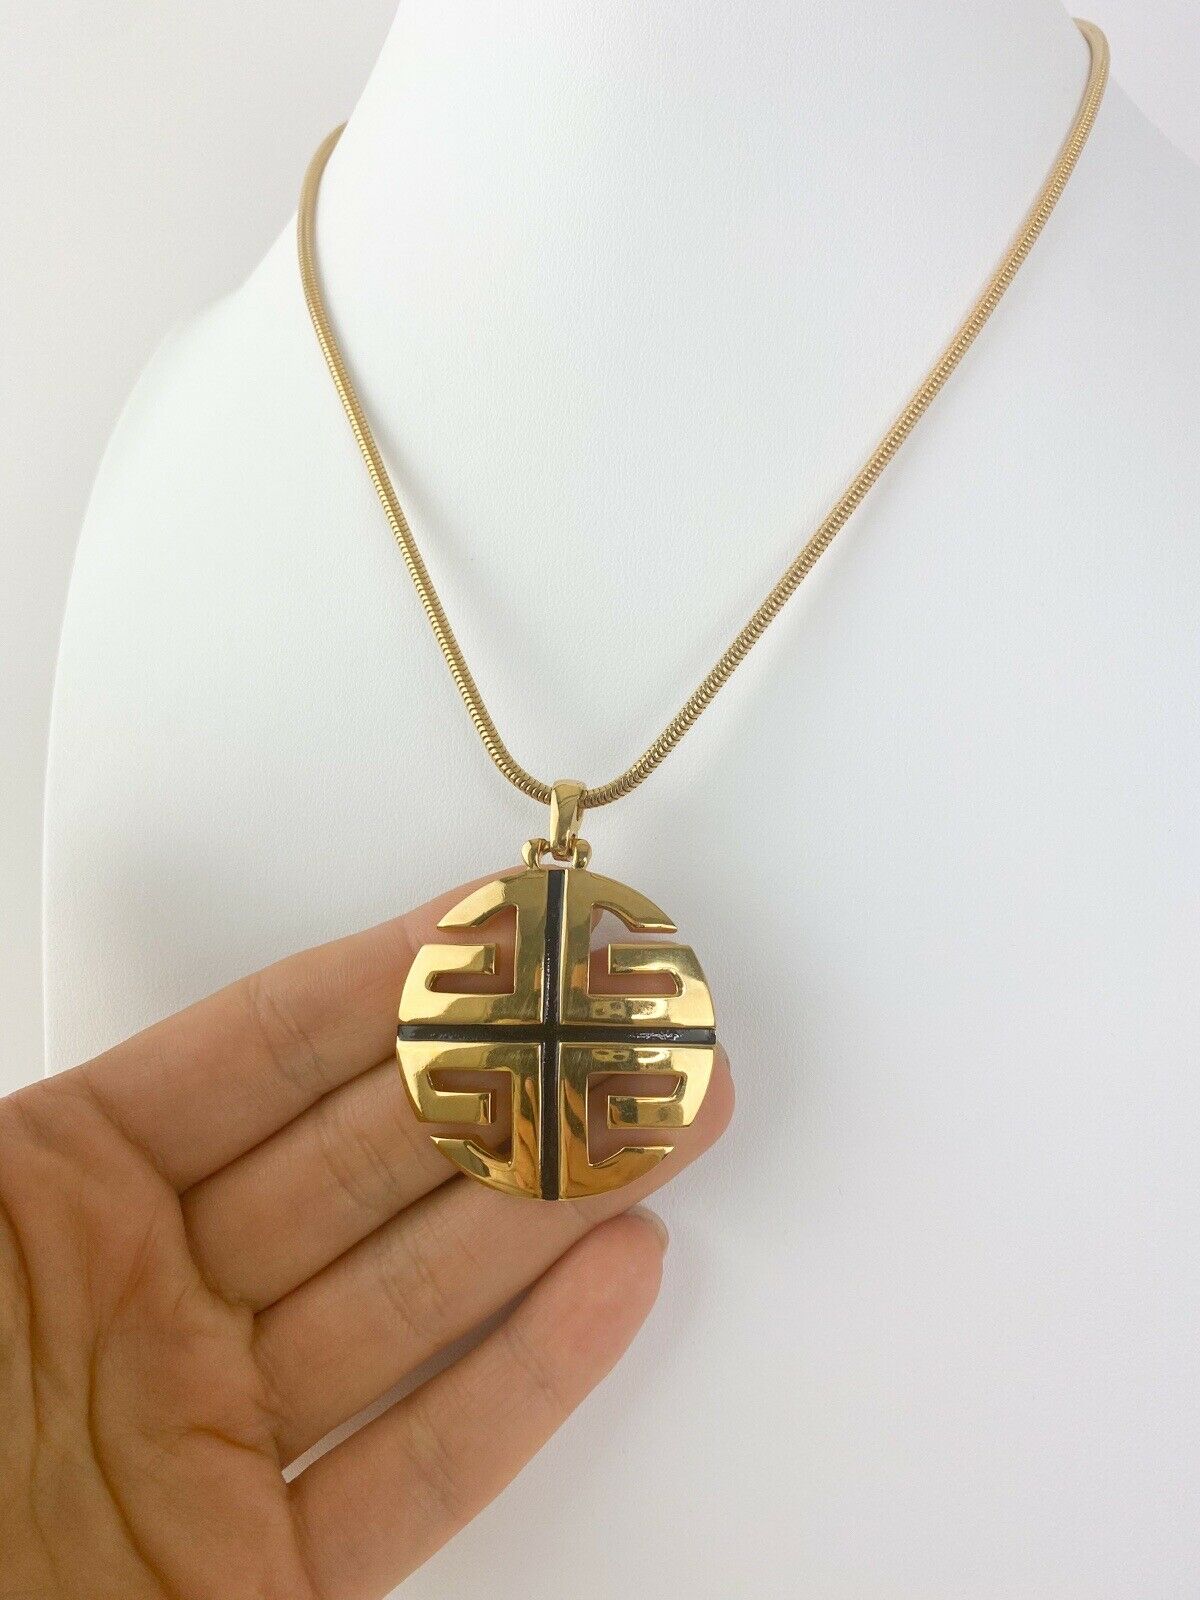 【SOLD OUT】Givenchy Paris New York Vintage Gold Tone Logo Necklace